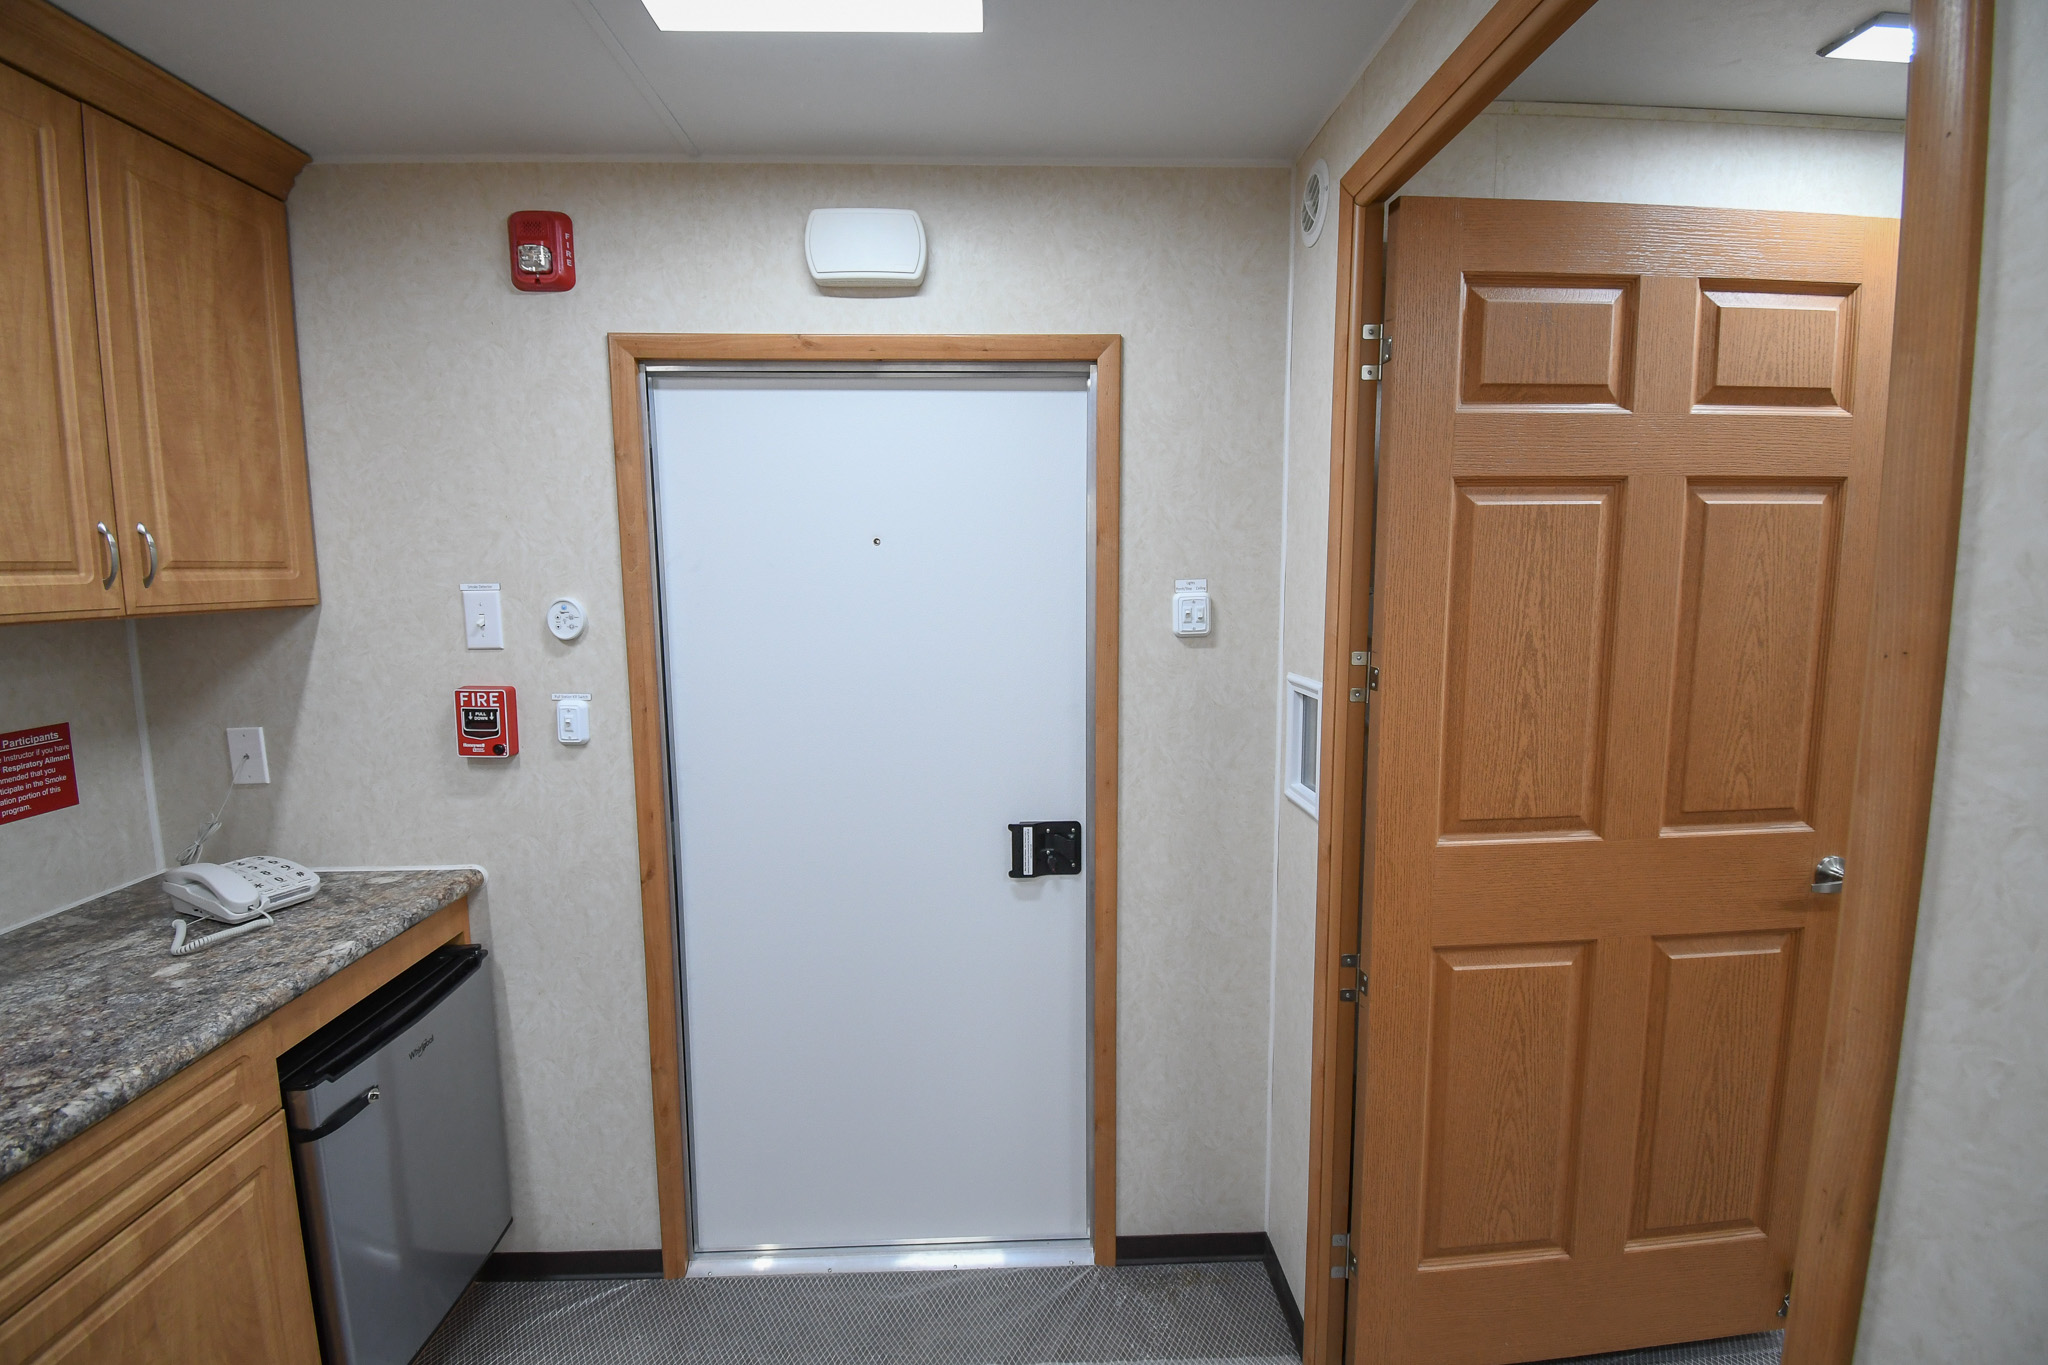 A view of the refrigerator, exit, phone, and pull station inside the units for Sandy, UT.